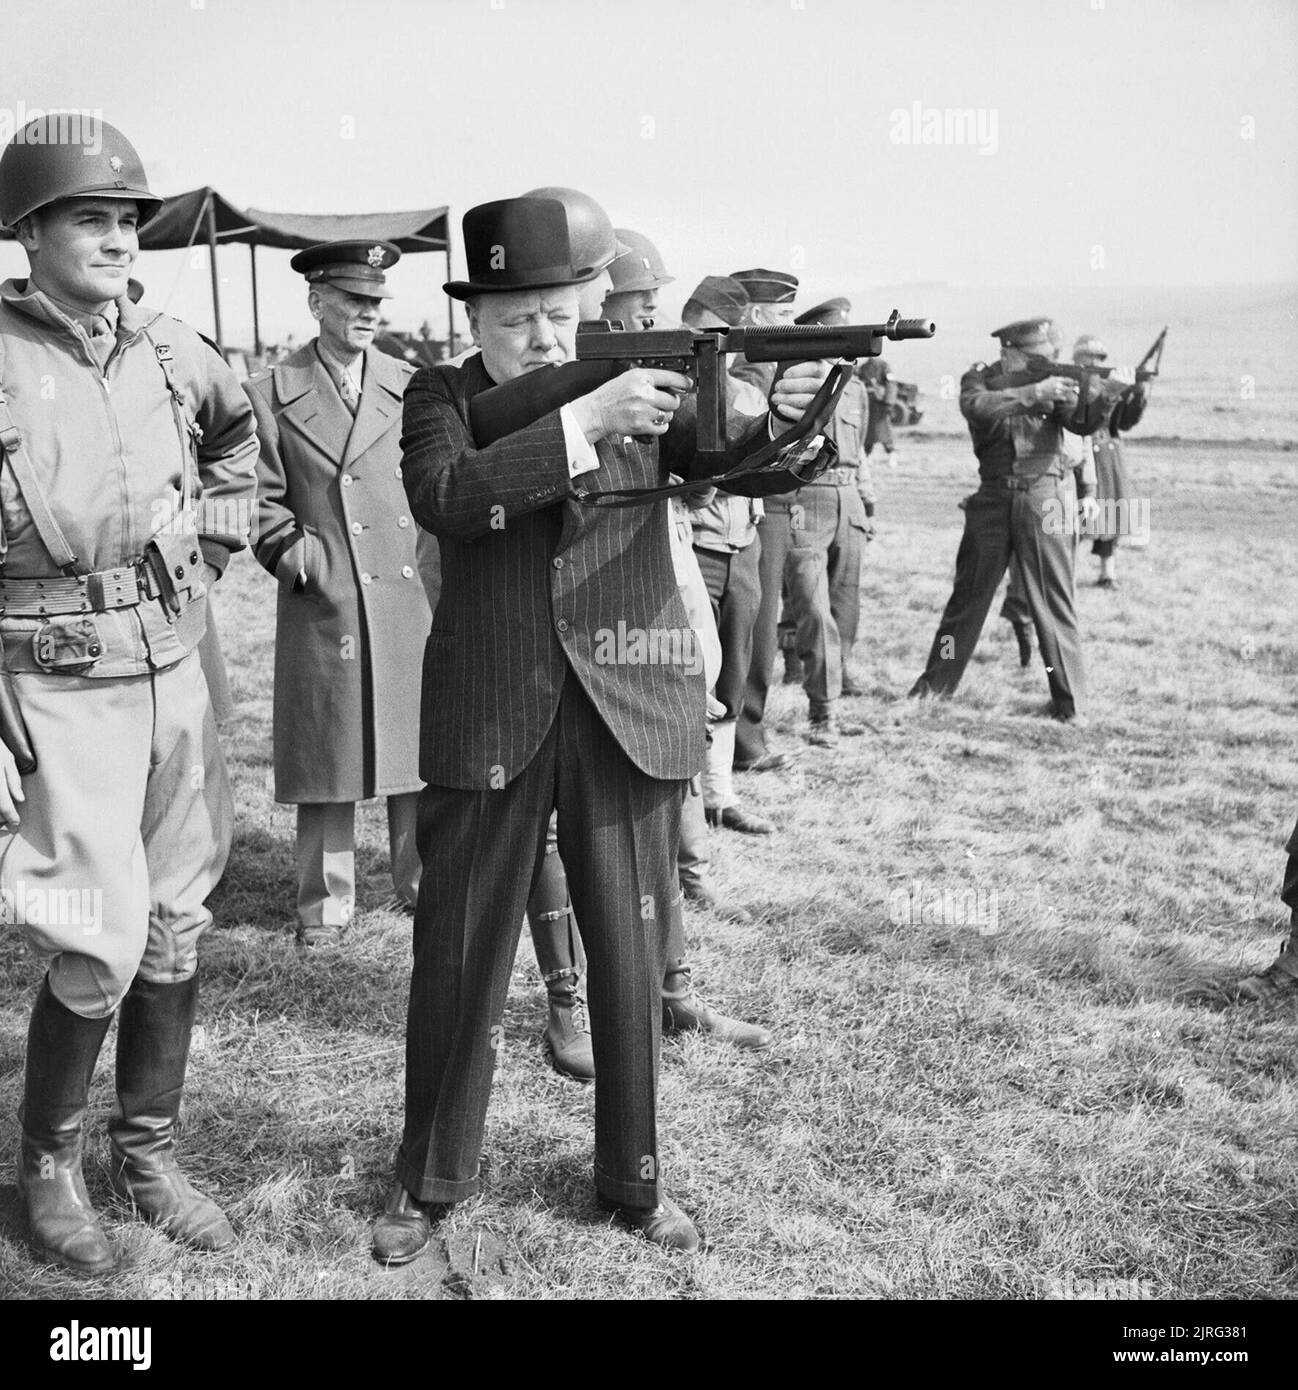 Winston Churchill fires a Thompson submachine gun alongside the Allied Supreme Commander, General Dwight D Eisenhower, during an inspection of US invasion forces, March 1944. The Prime Minister Winston Churchill fires a Thompson 'Tommy' submachine gun alongside Supreme Allied Commander of the Allied Expeditionary Force General Dwight D Eisenhower as American soldiers look on in southern England in late March 1944. Stock Photo